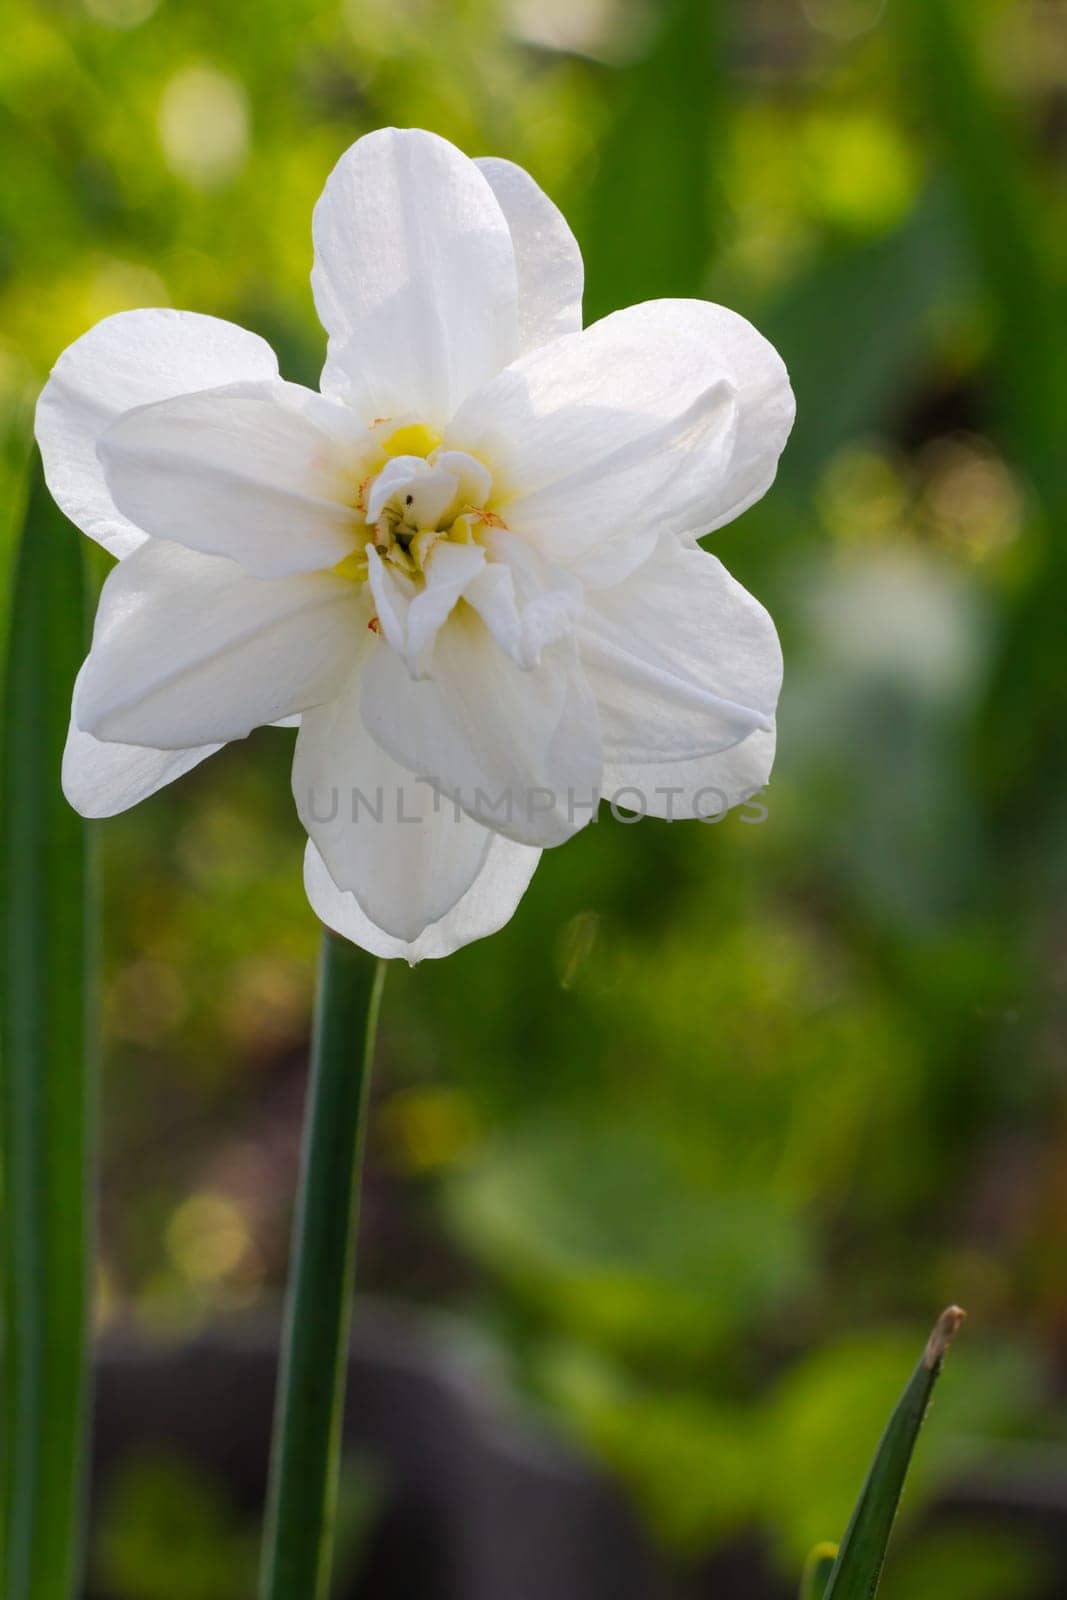 Beautiful flower of white daffodil growing in the garden. by mvg6894